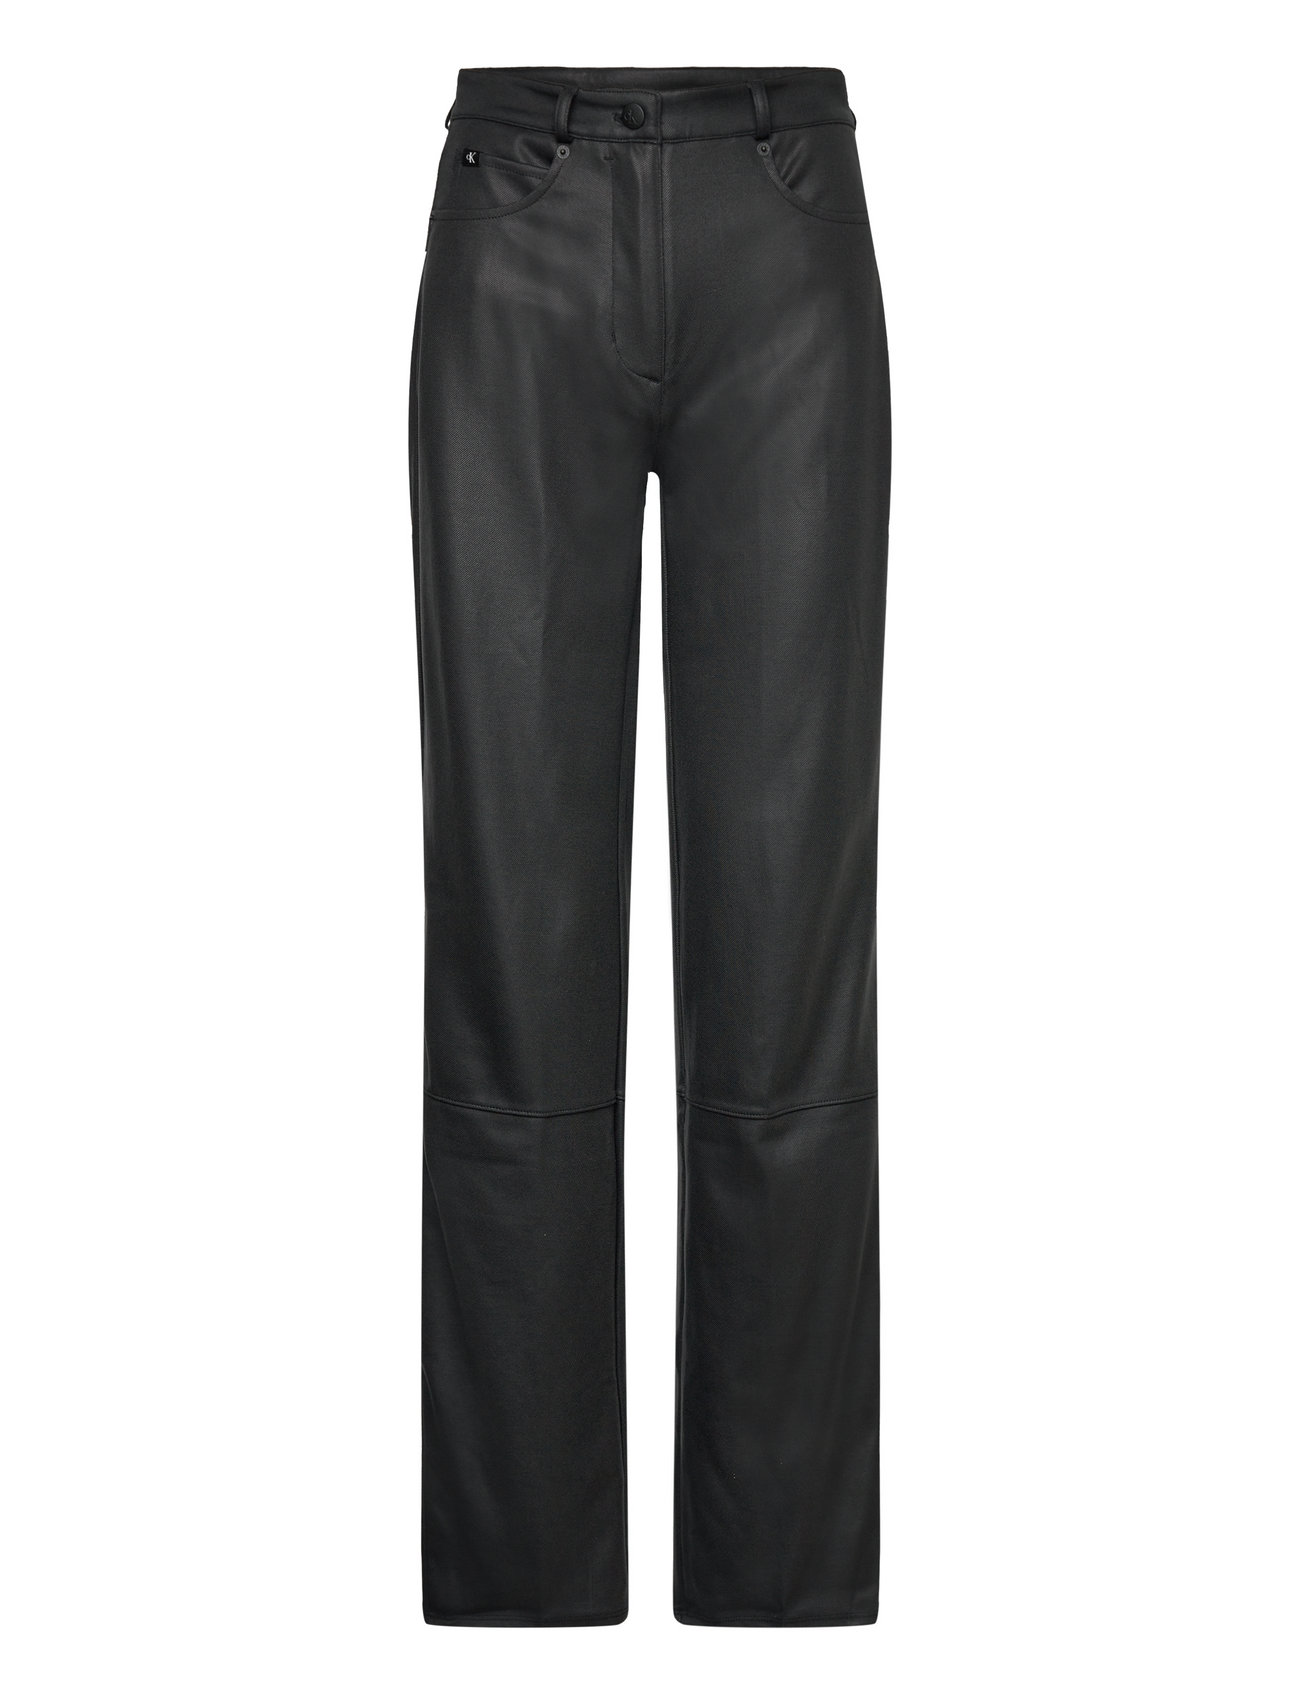 THE STRAIGHT-LEG LEATHER TROUSERS - DARK BROWN - COS